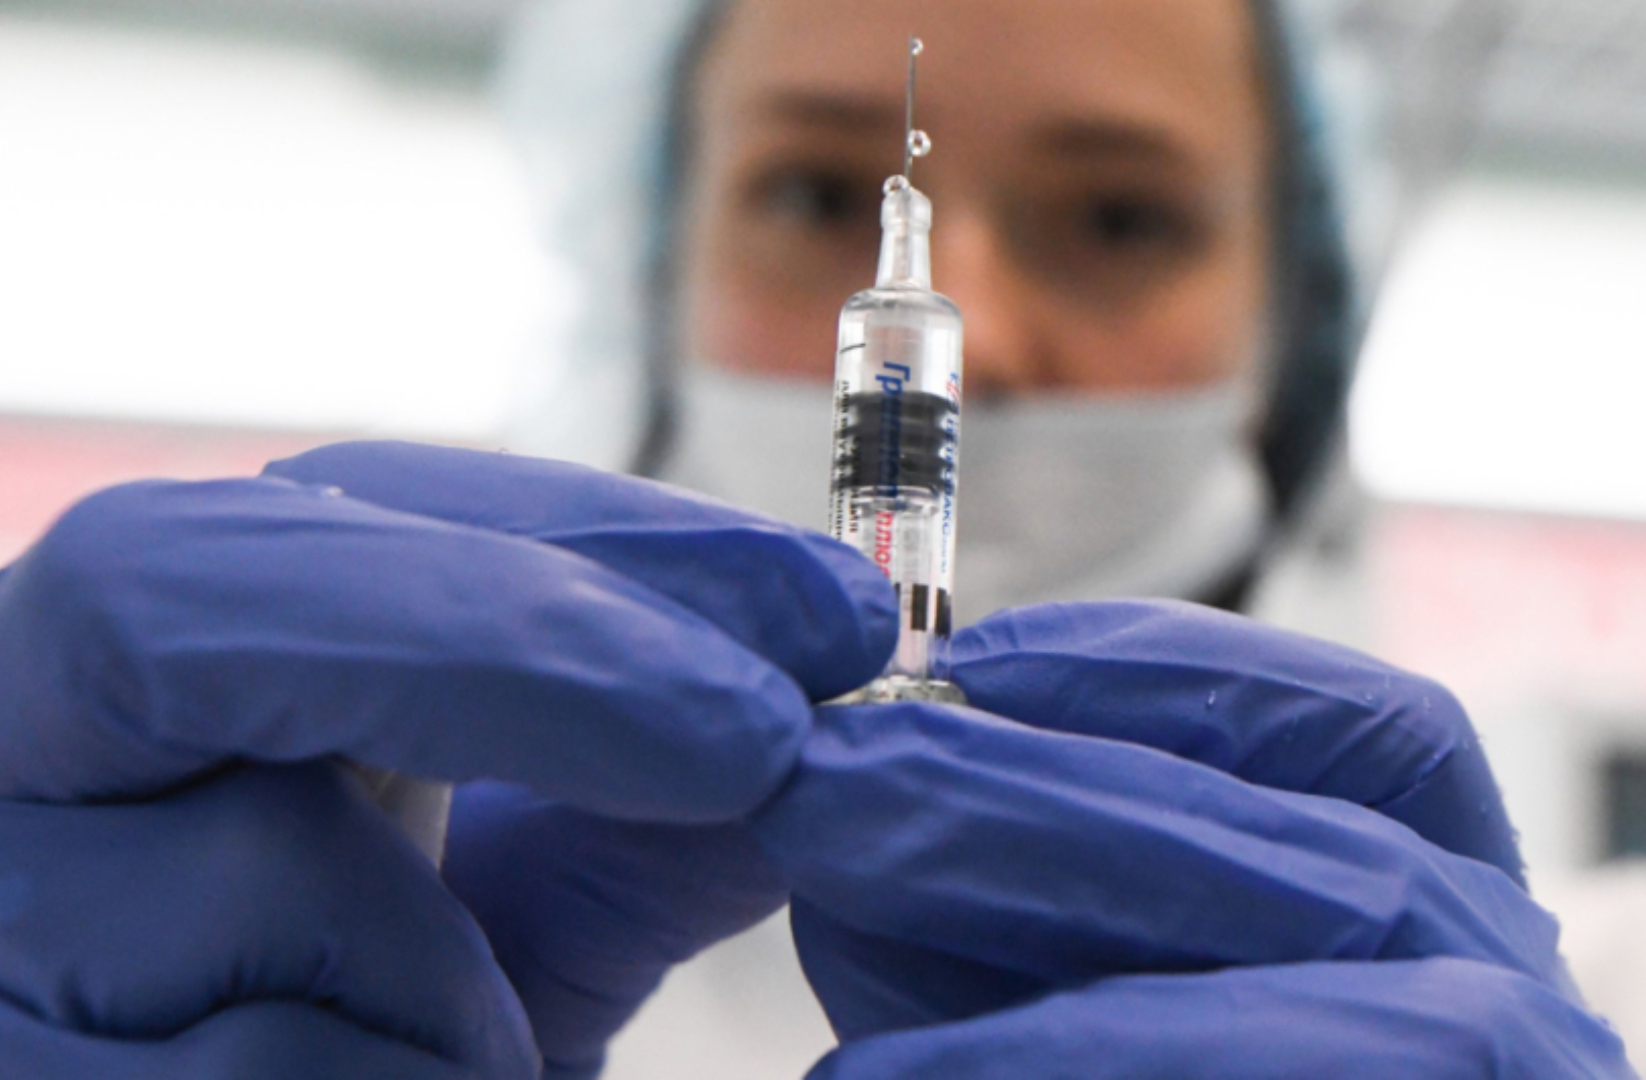 Russia Approves 2nd Vaccine EpiVacCorona After Sputnik-V 3rd Coming